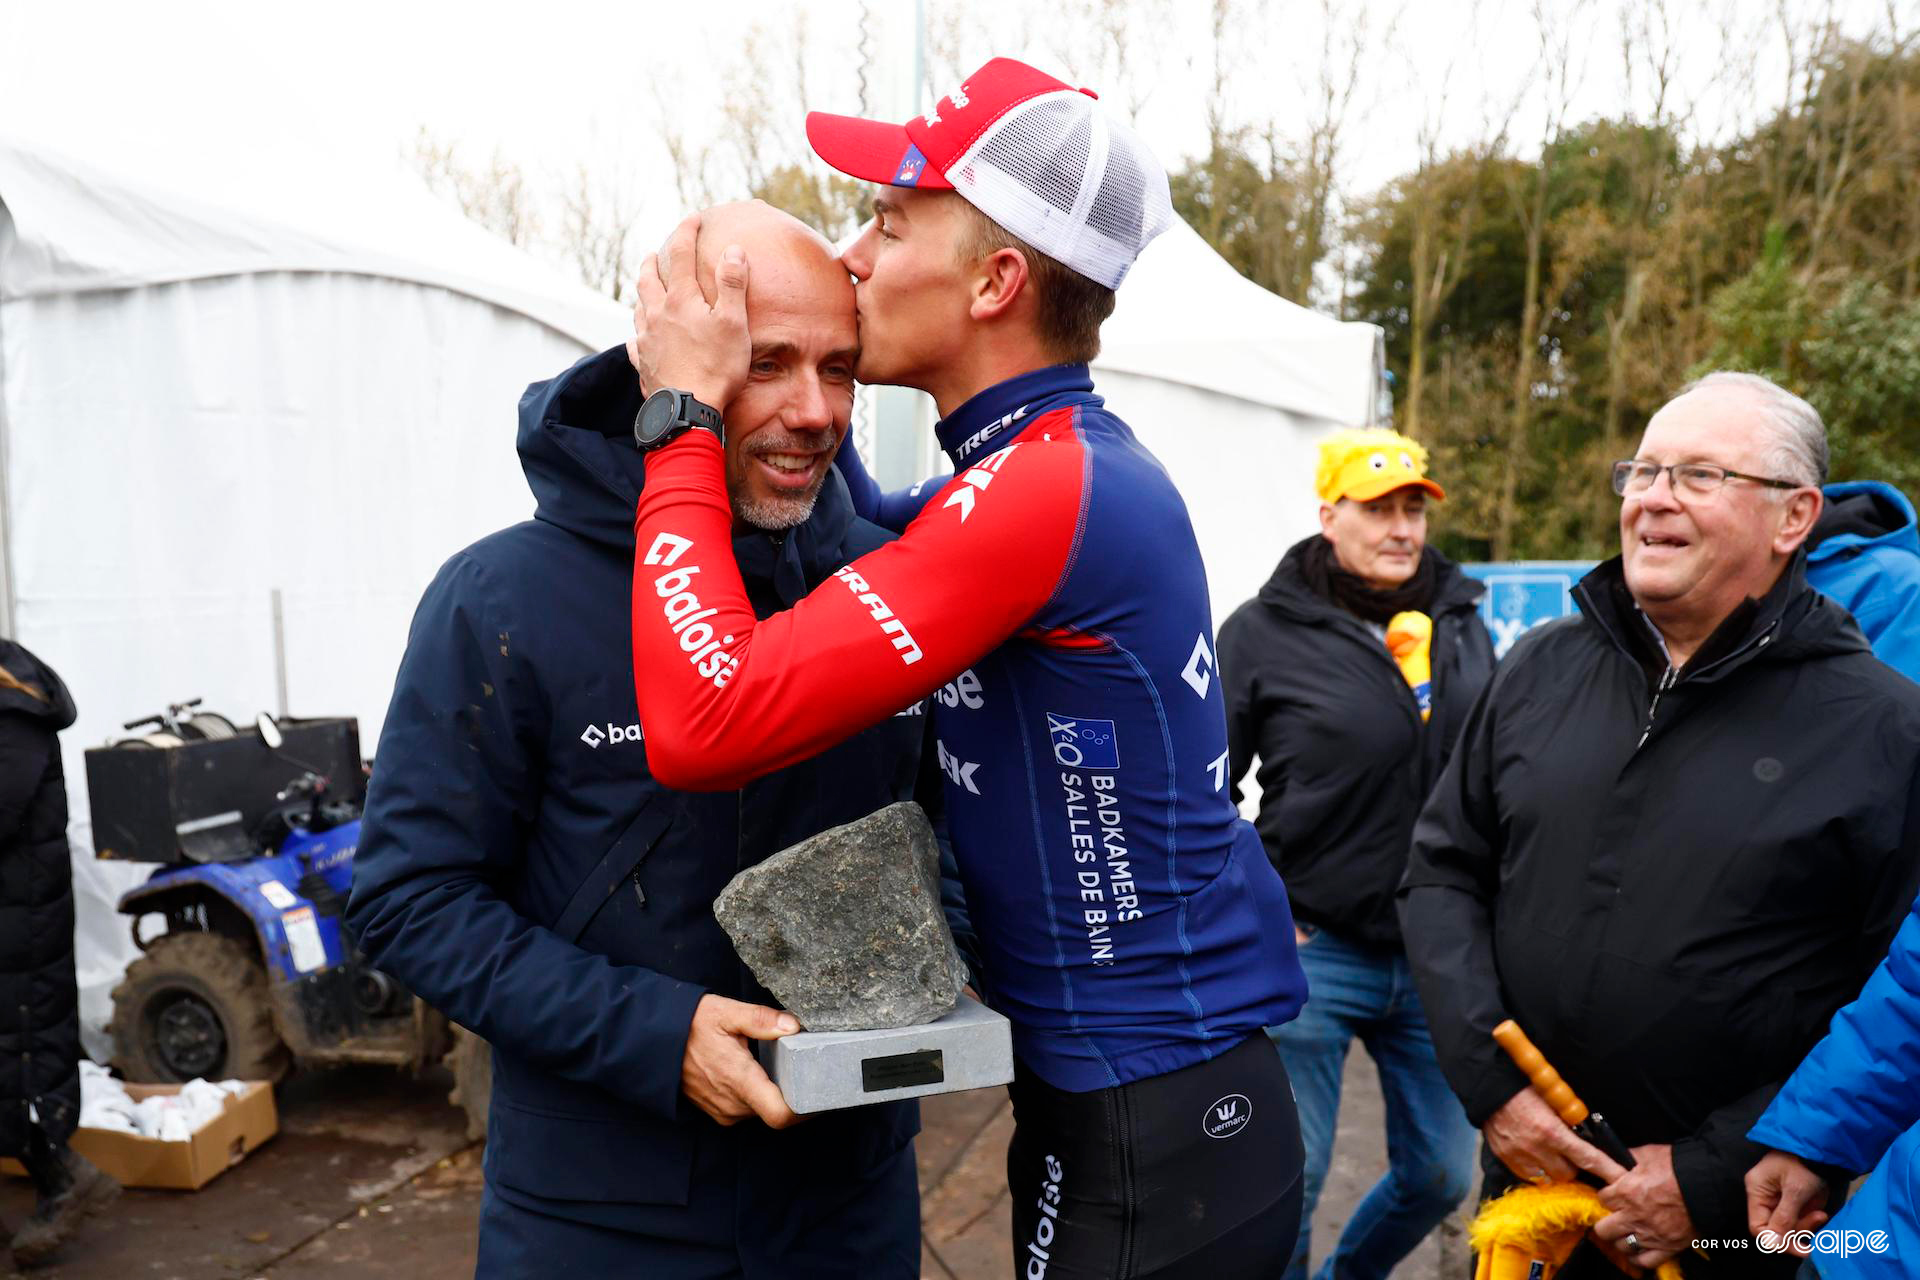 Thibau Nys kisses the top of his father's head, Sven holding the Koppenbergcross cobble trophy.